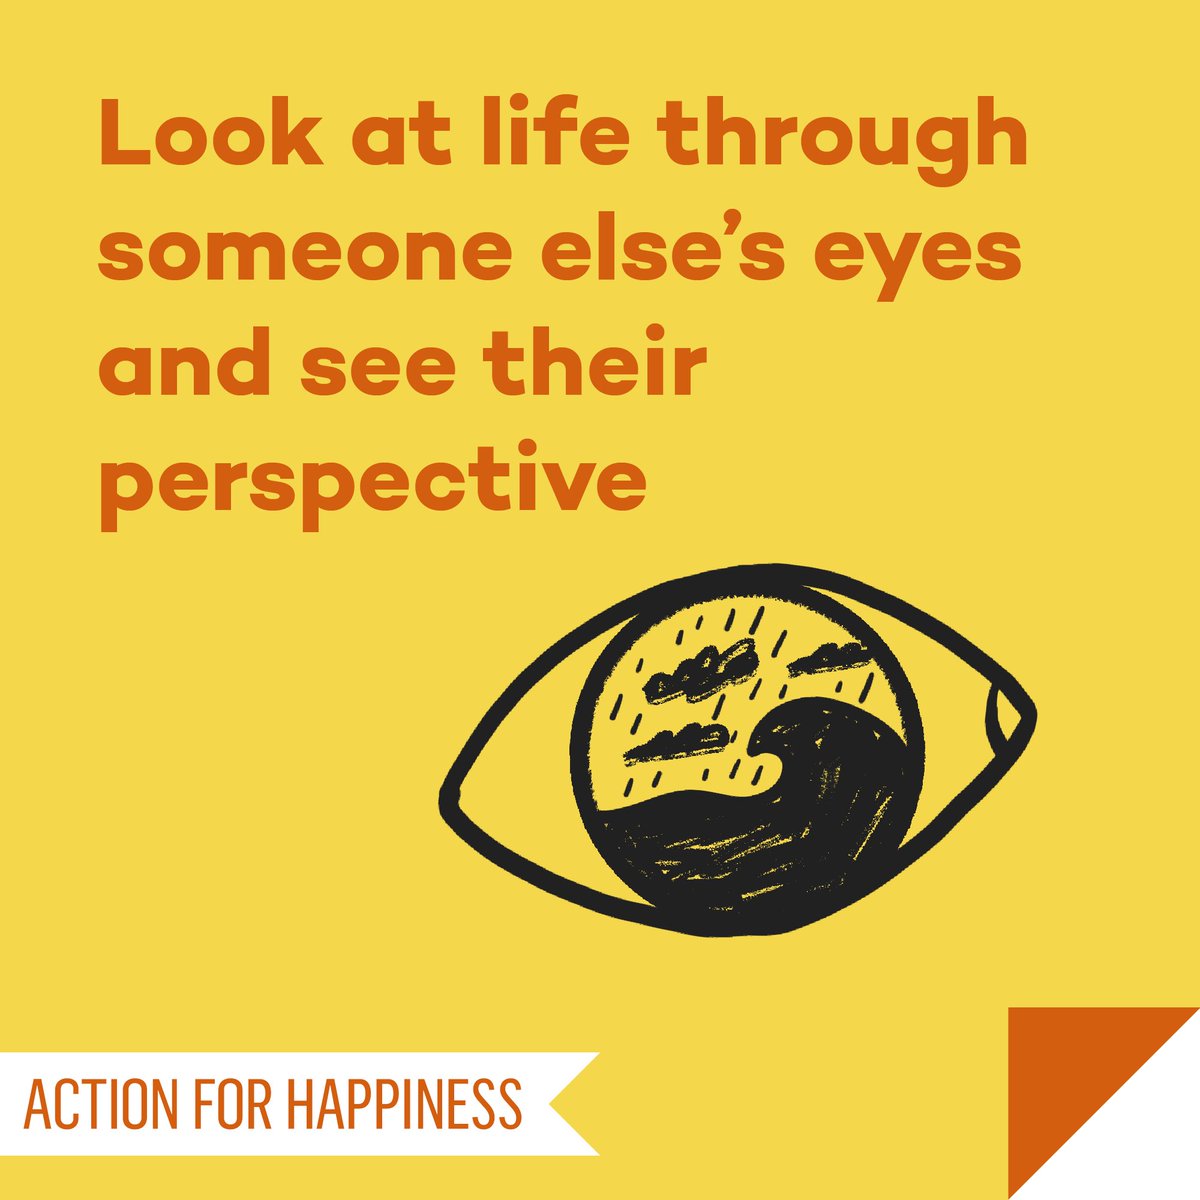 New Ways November - Day 16: Look at life through someone else’s eyes and see their perspective actionforhappiness.org/new-ways-novem… #NewWaysNovember